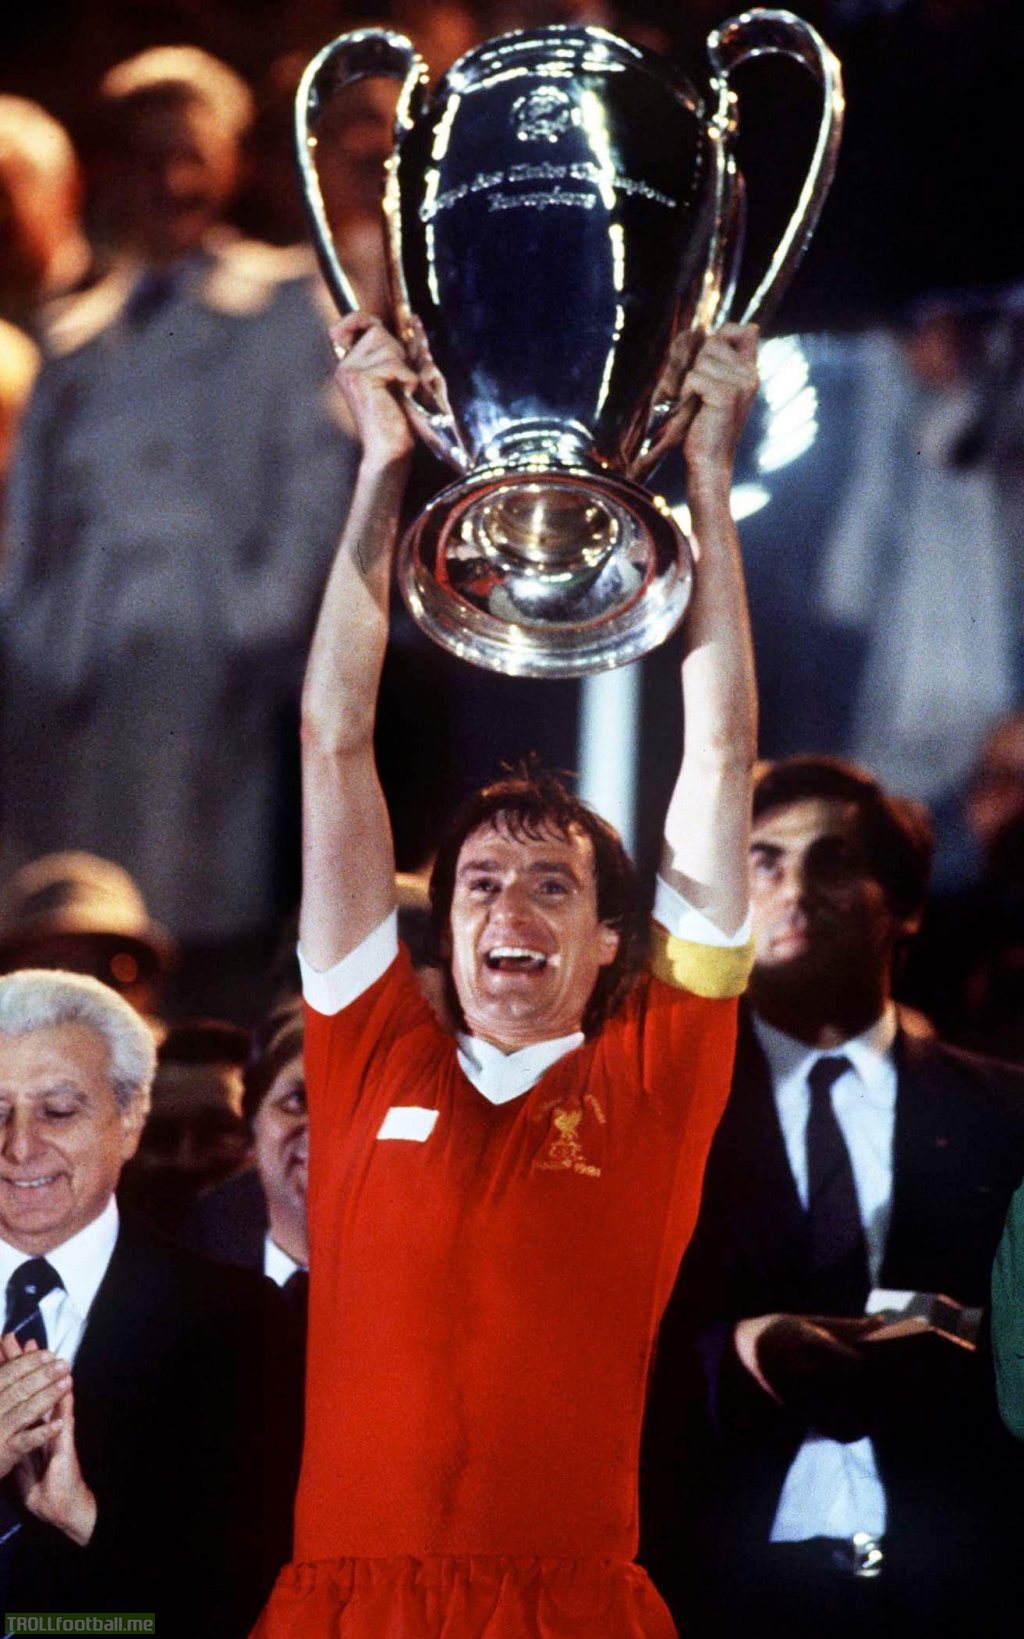 On this day in 1981 Liverpool beat Real Madrid 1-0 in Paris to win their third European Cup.